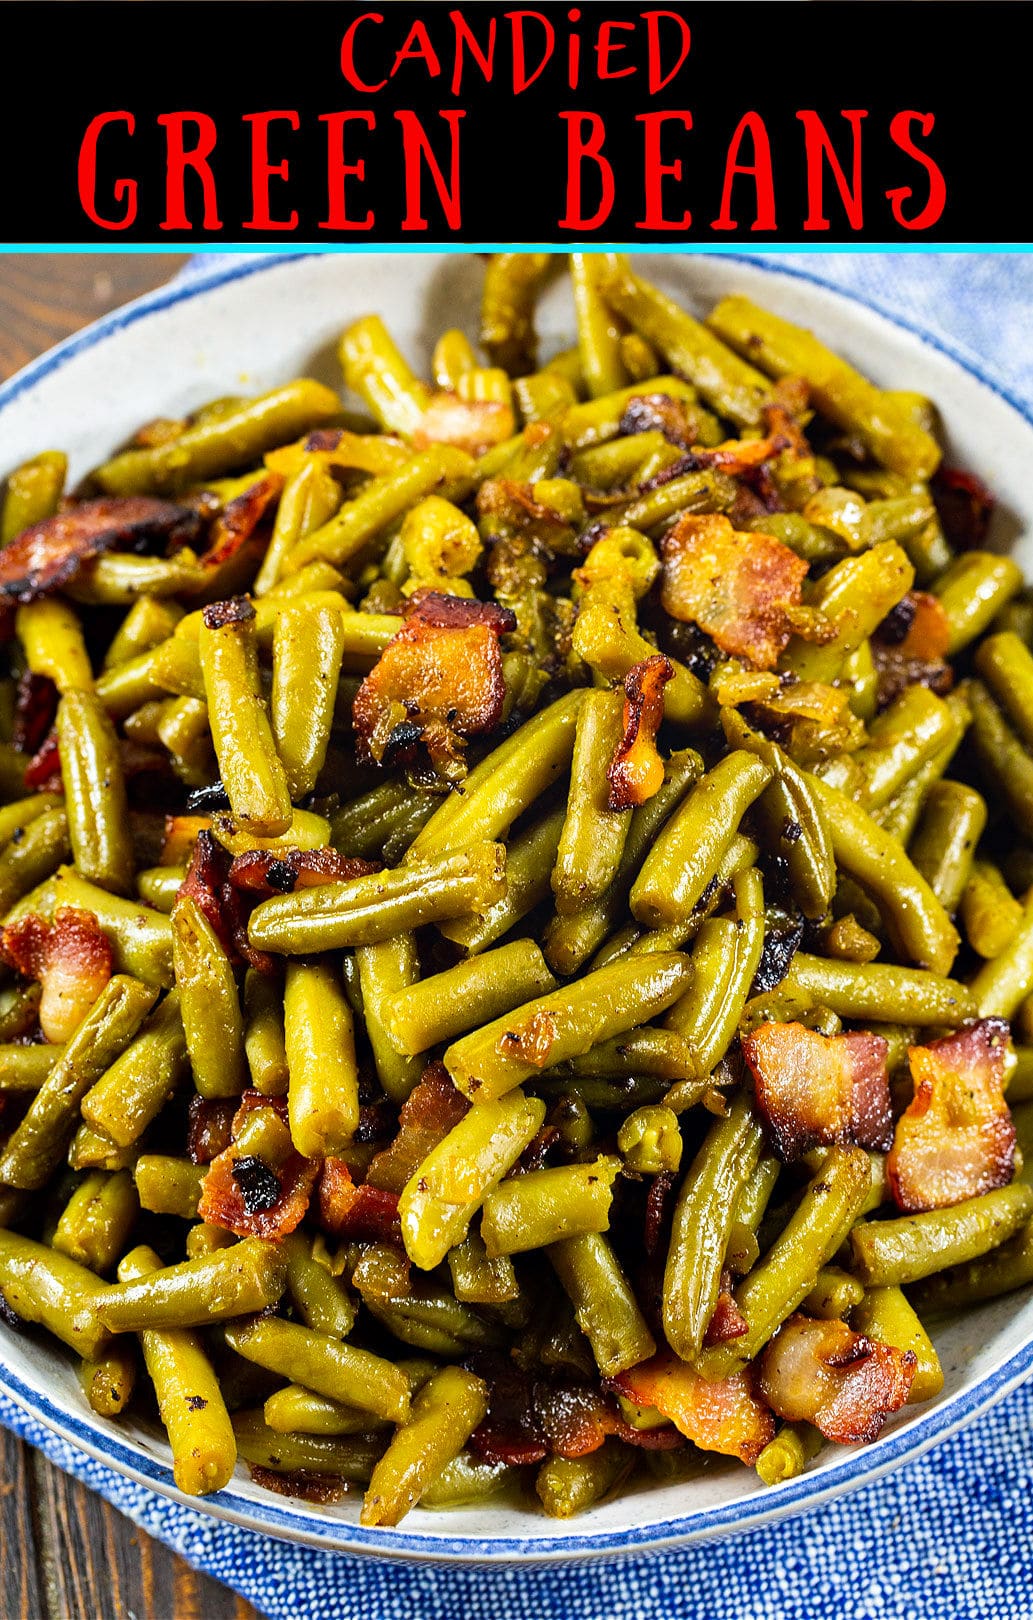 Candied Green Beans with bacon in a serving bowl.